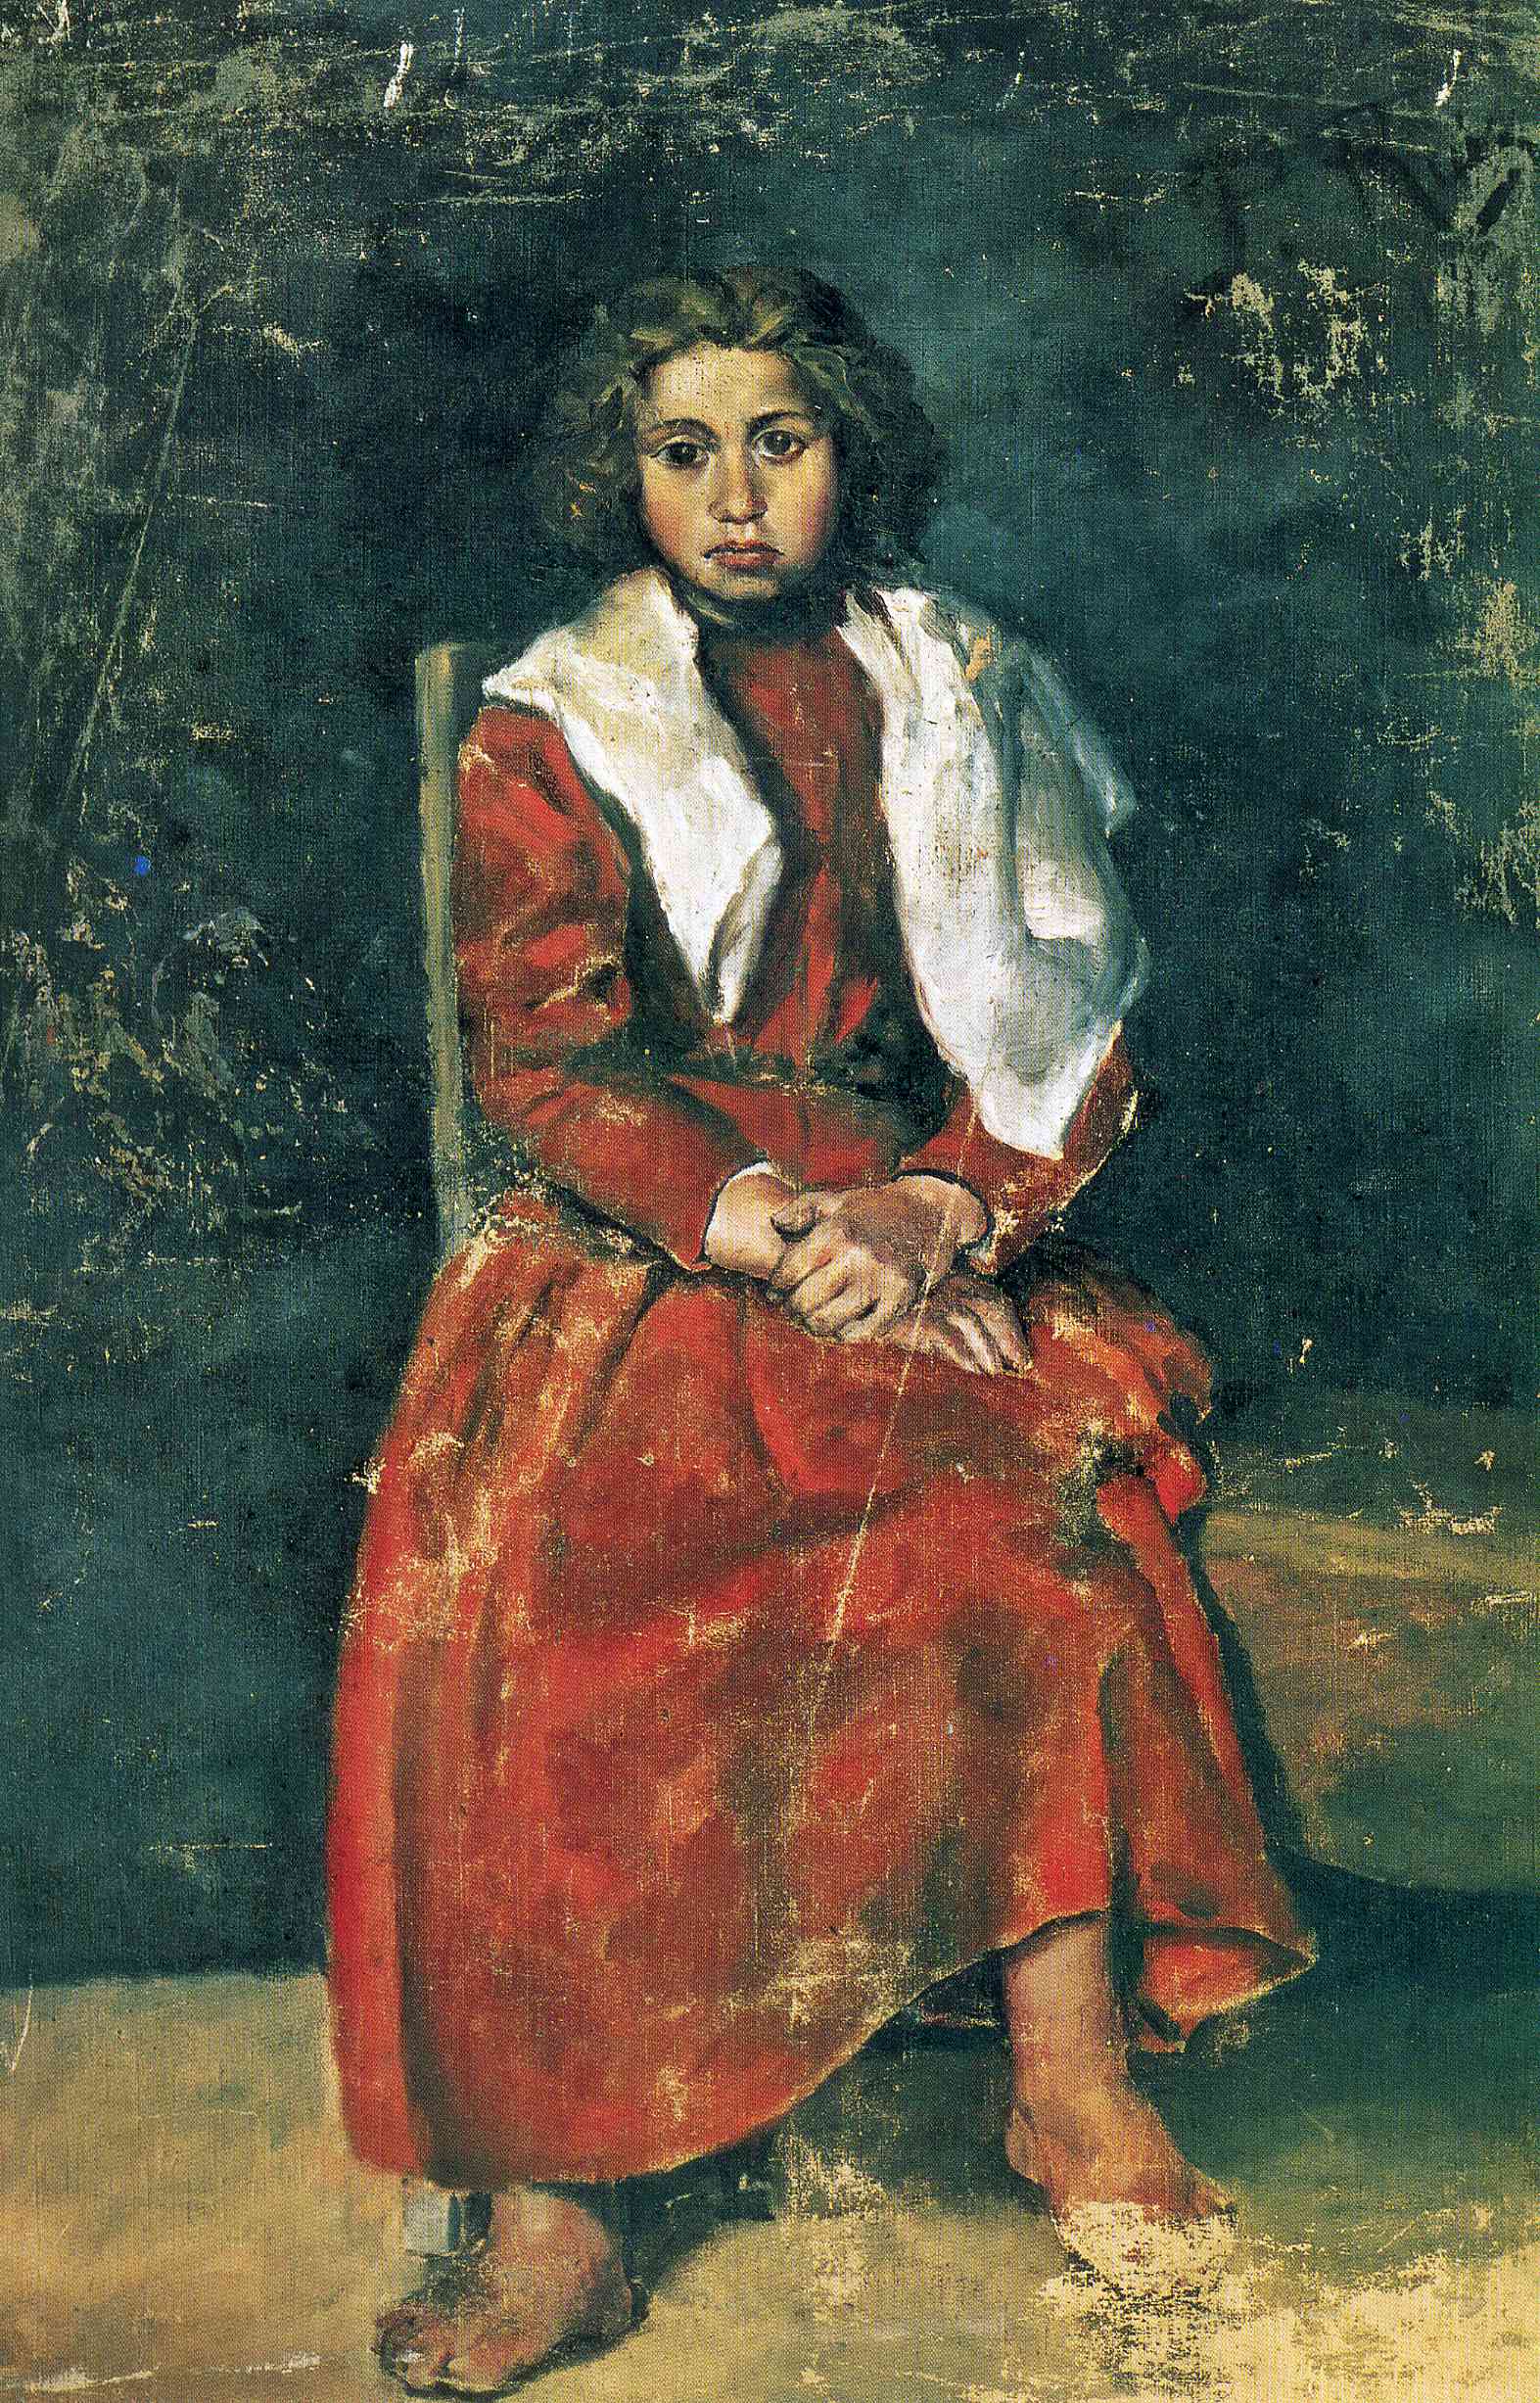 https://uploads6.wikiart.org/images/pablo-picasso/the-barefoot-girl-1895.jpg